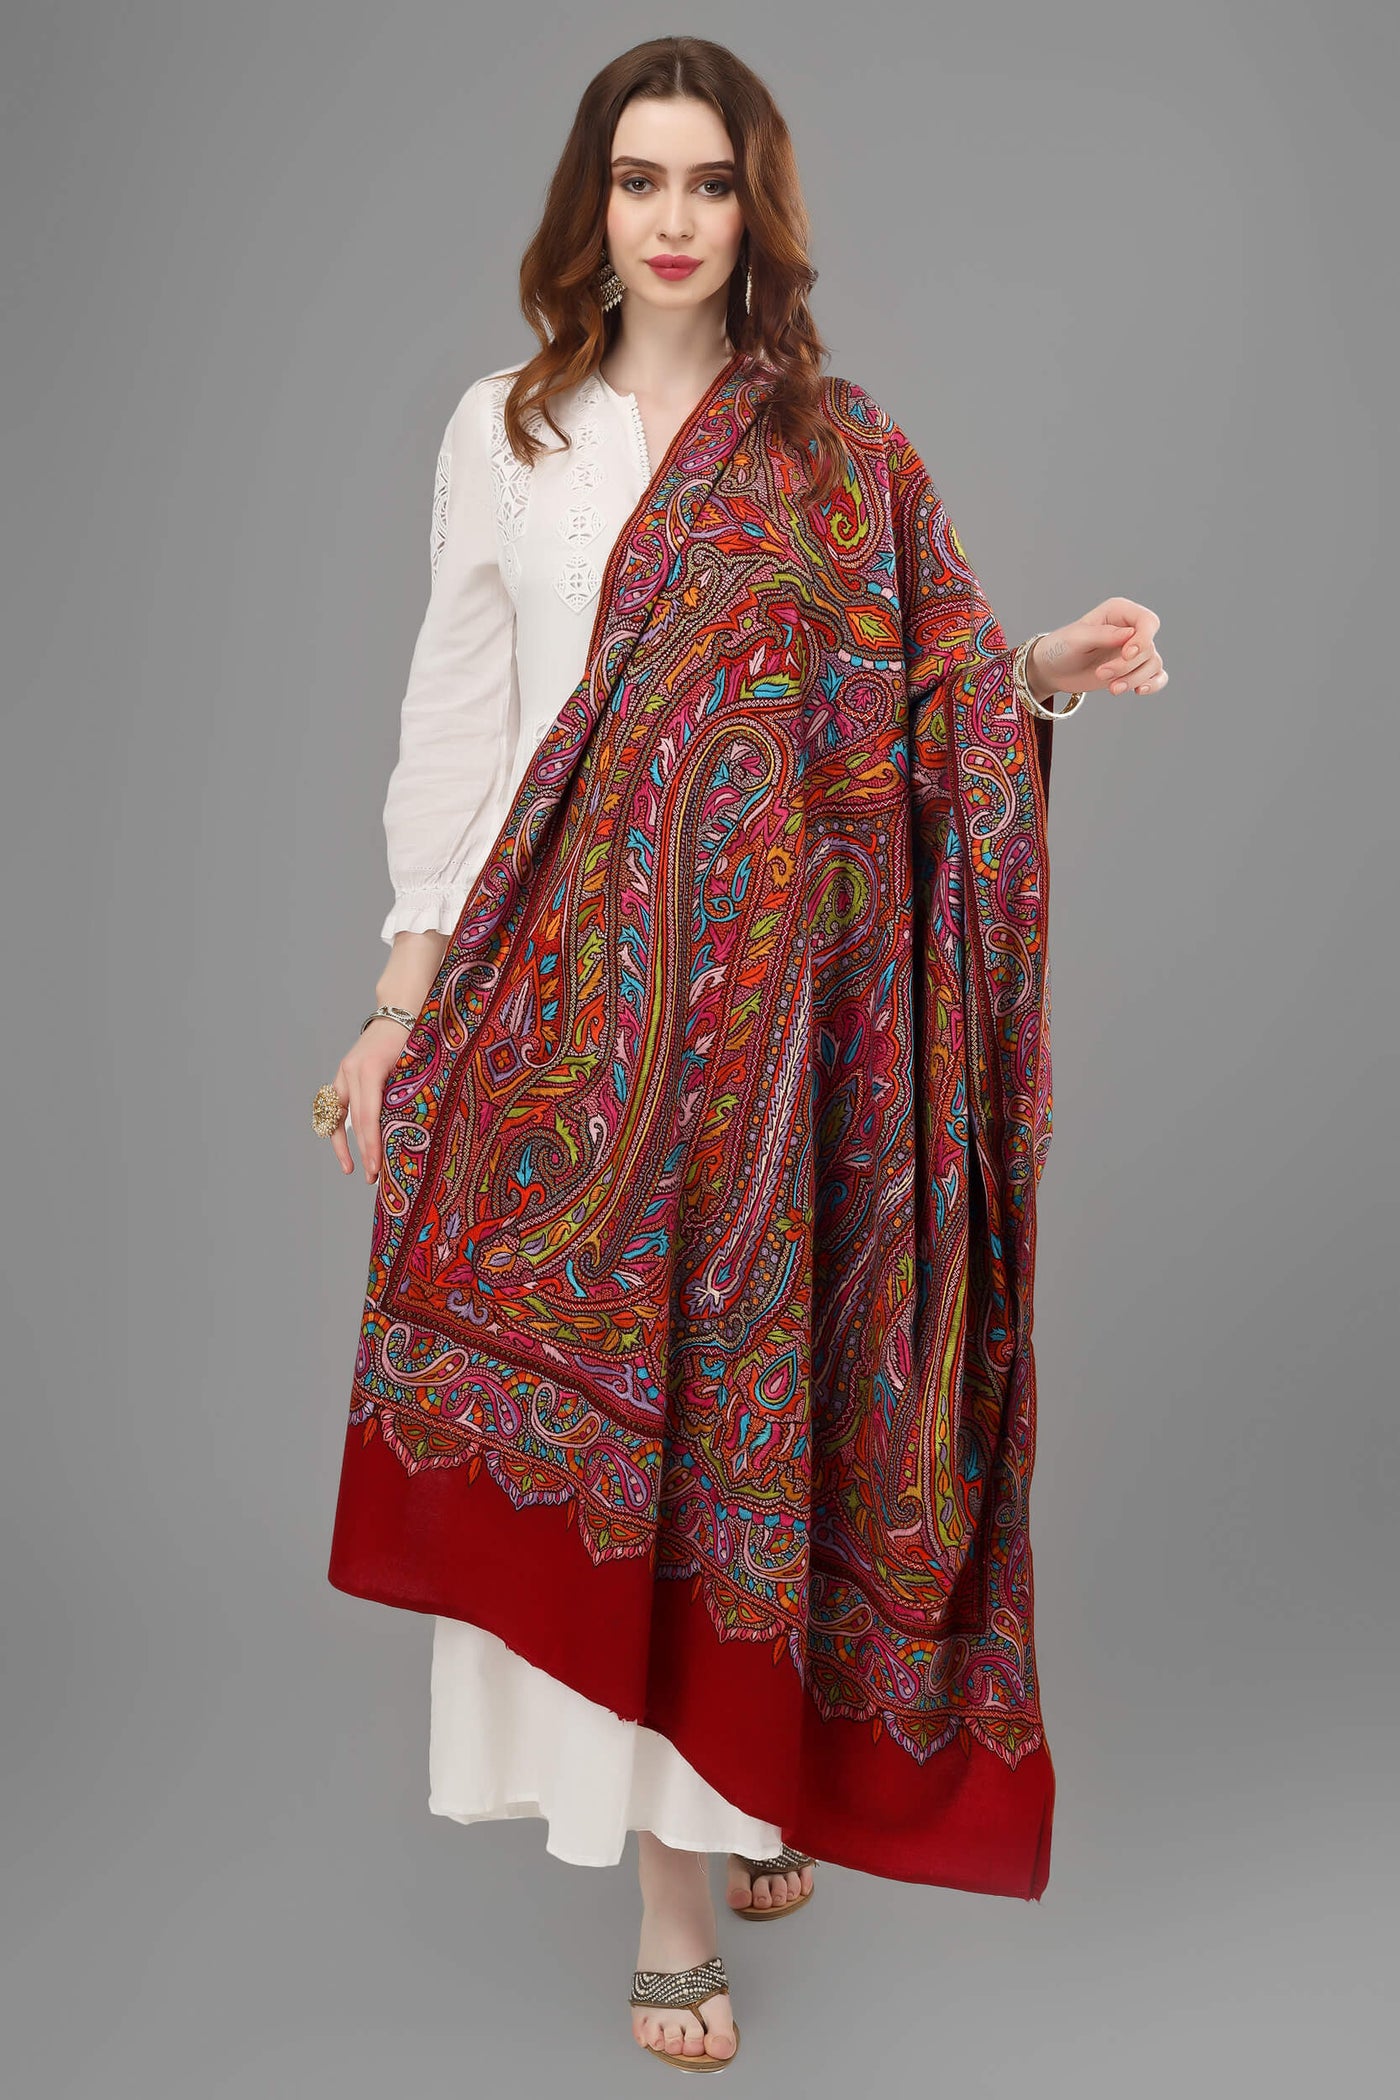 "PASHMINA SHAWL -maroon colored Pashmina features intricate Sozni ( Totdaar - small circles )across its surface called the Totdaar Jama. "PASHMINA SHAWLS IN NEW YORK - Urban Chic and Comfort"